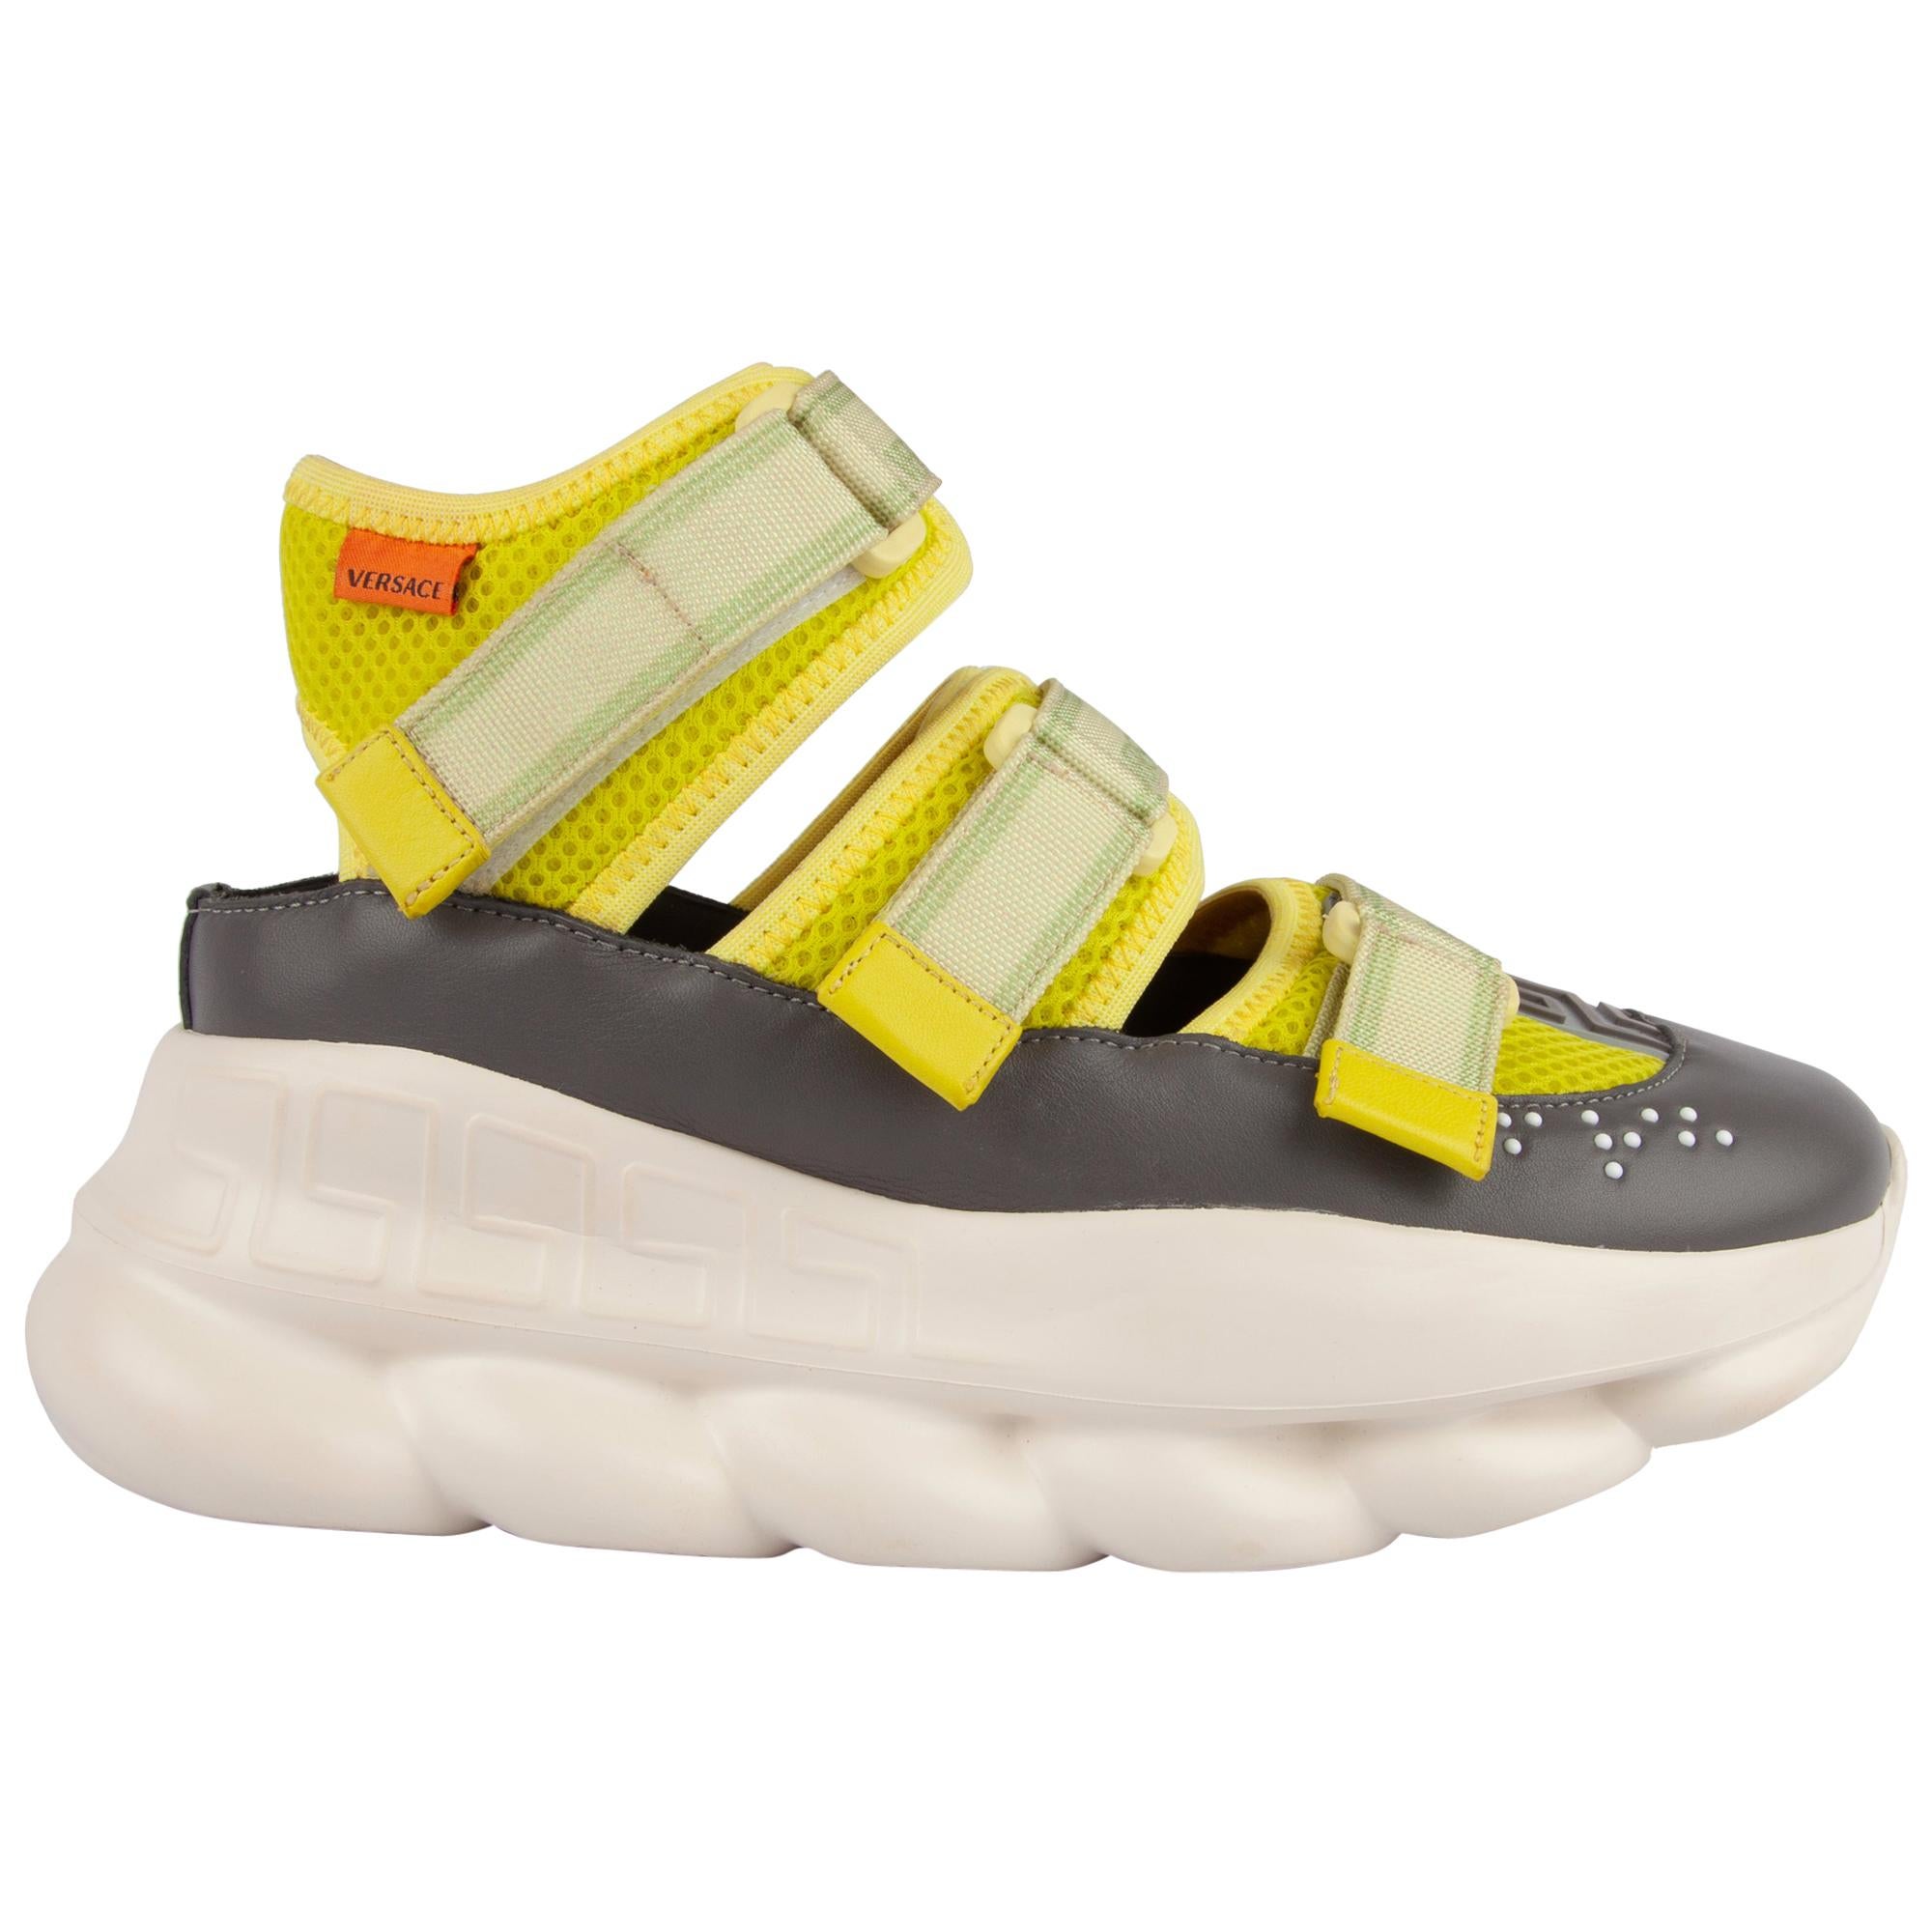 Versace Runway Lime Green Cut-Out Velcro Chain Reaction Sneakers Size 40